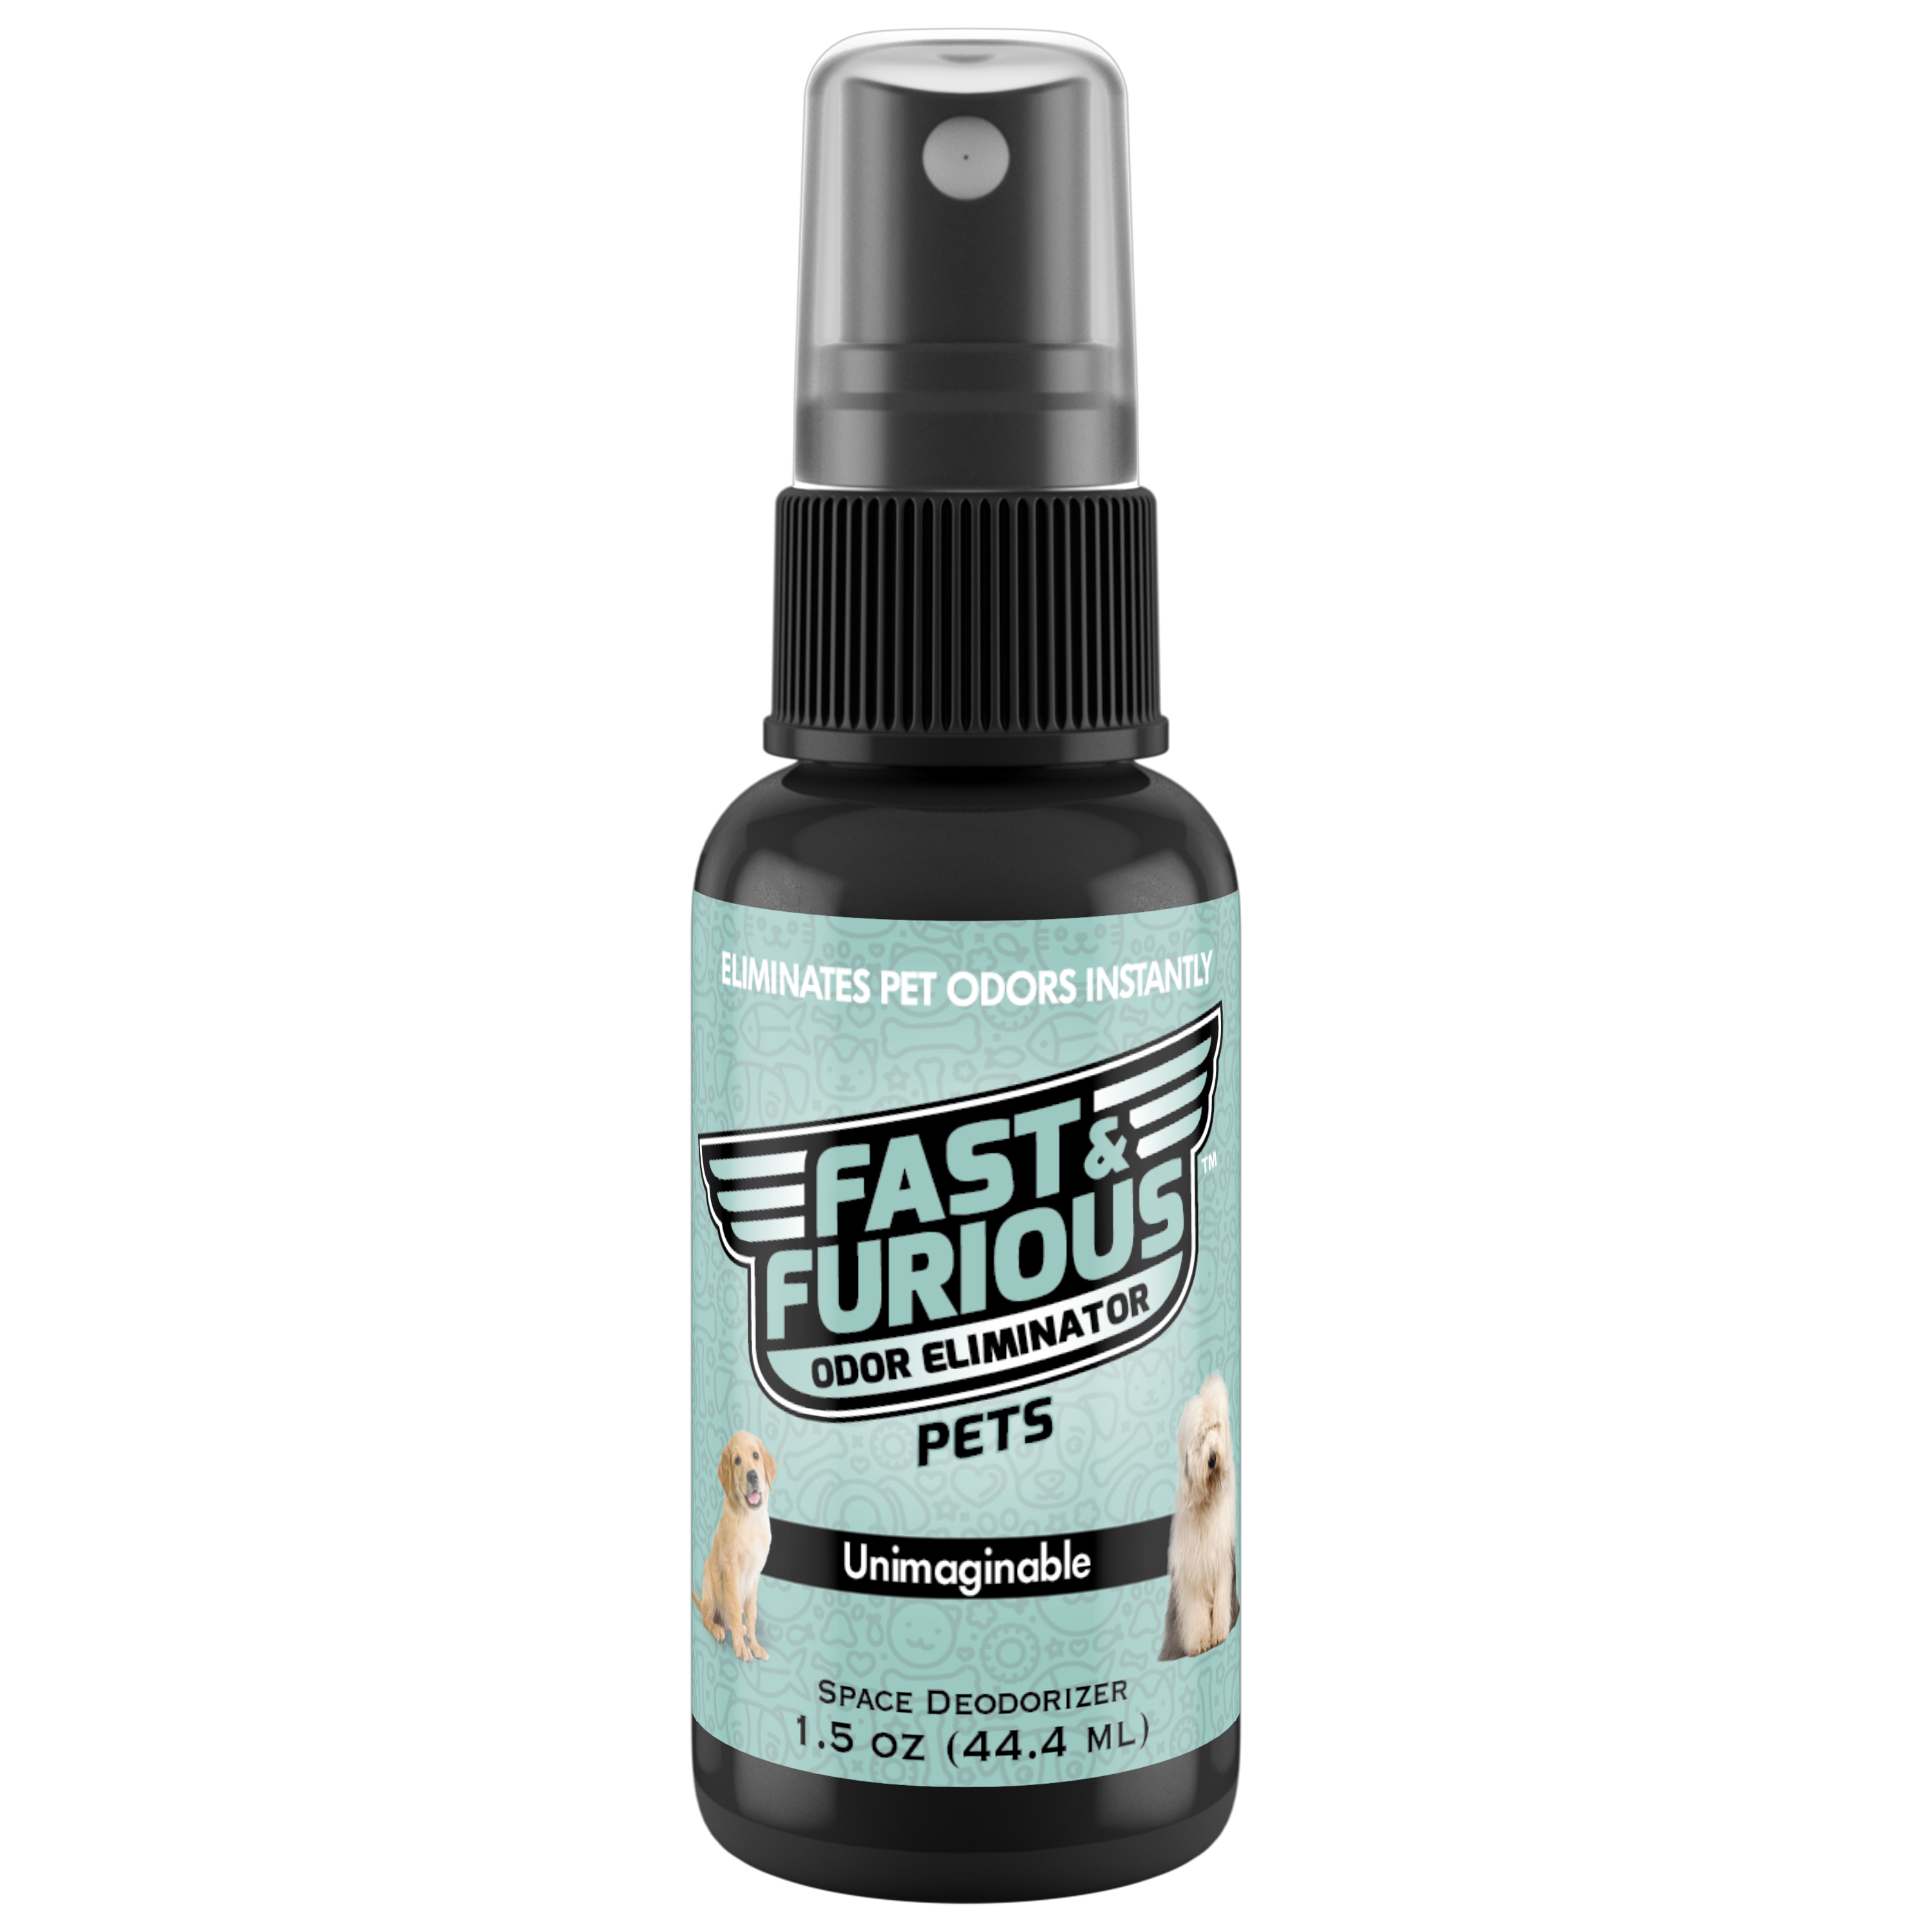 Fast and Furious Pets Odor Eliminator - Unimaginable Scent